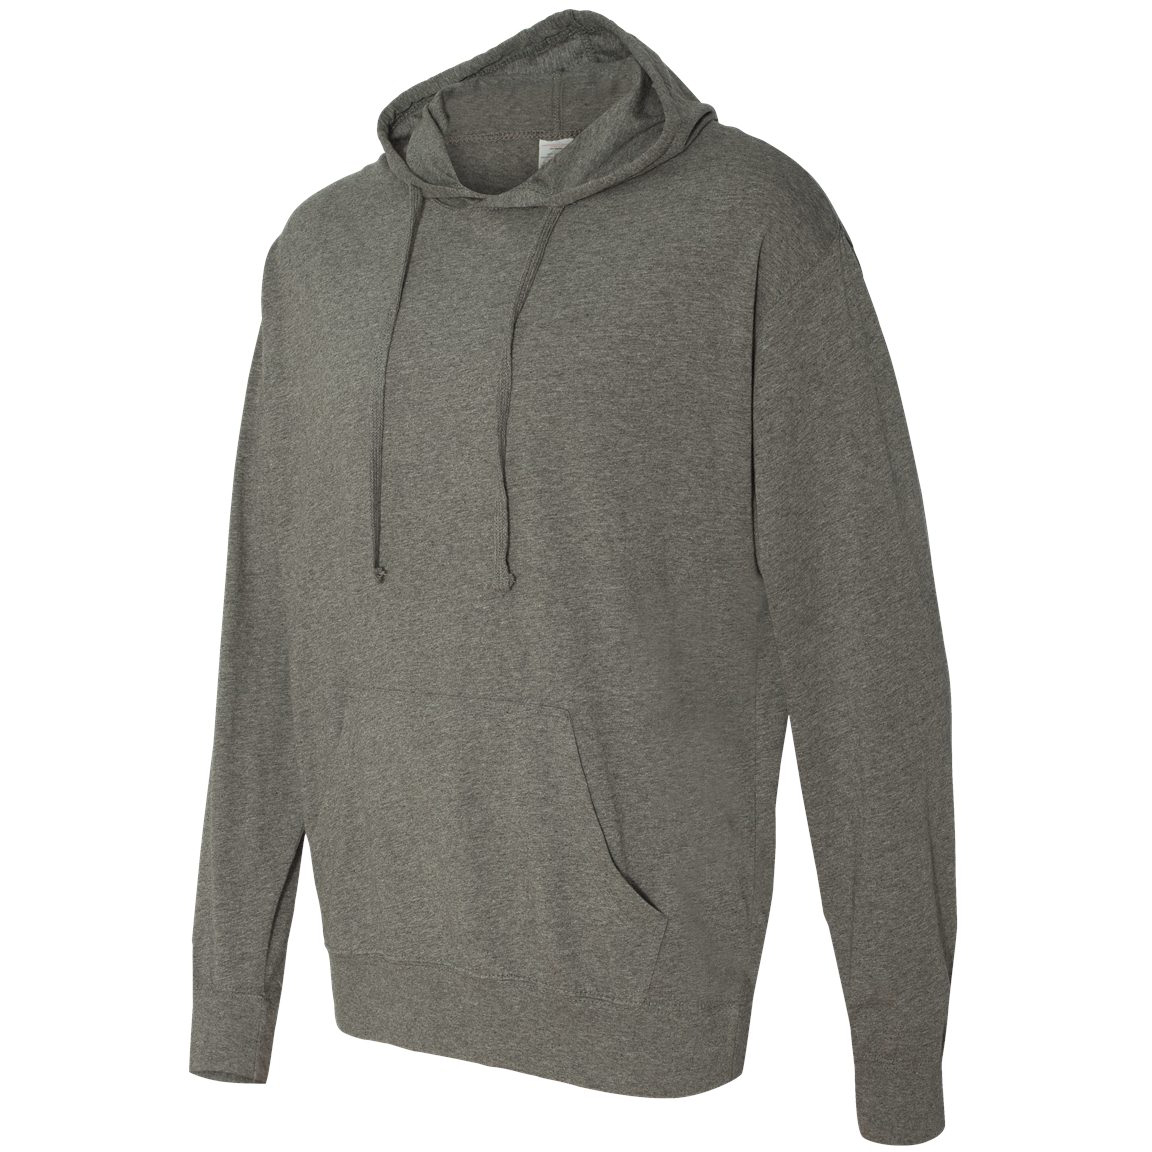 Independent Trading Co. SS150J Lightweight Hooded Pullover T-Shirt ...